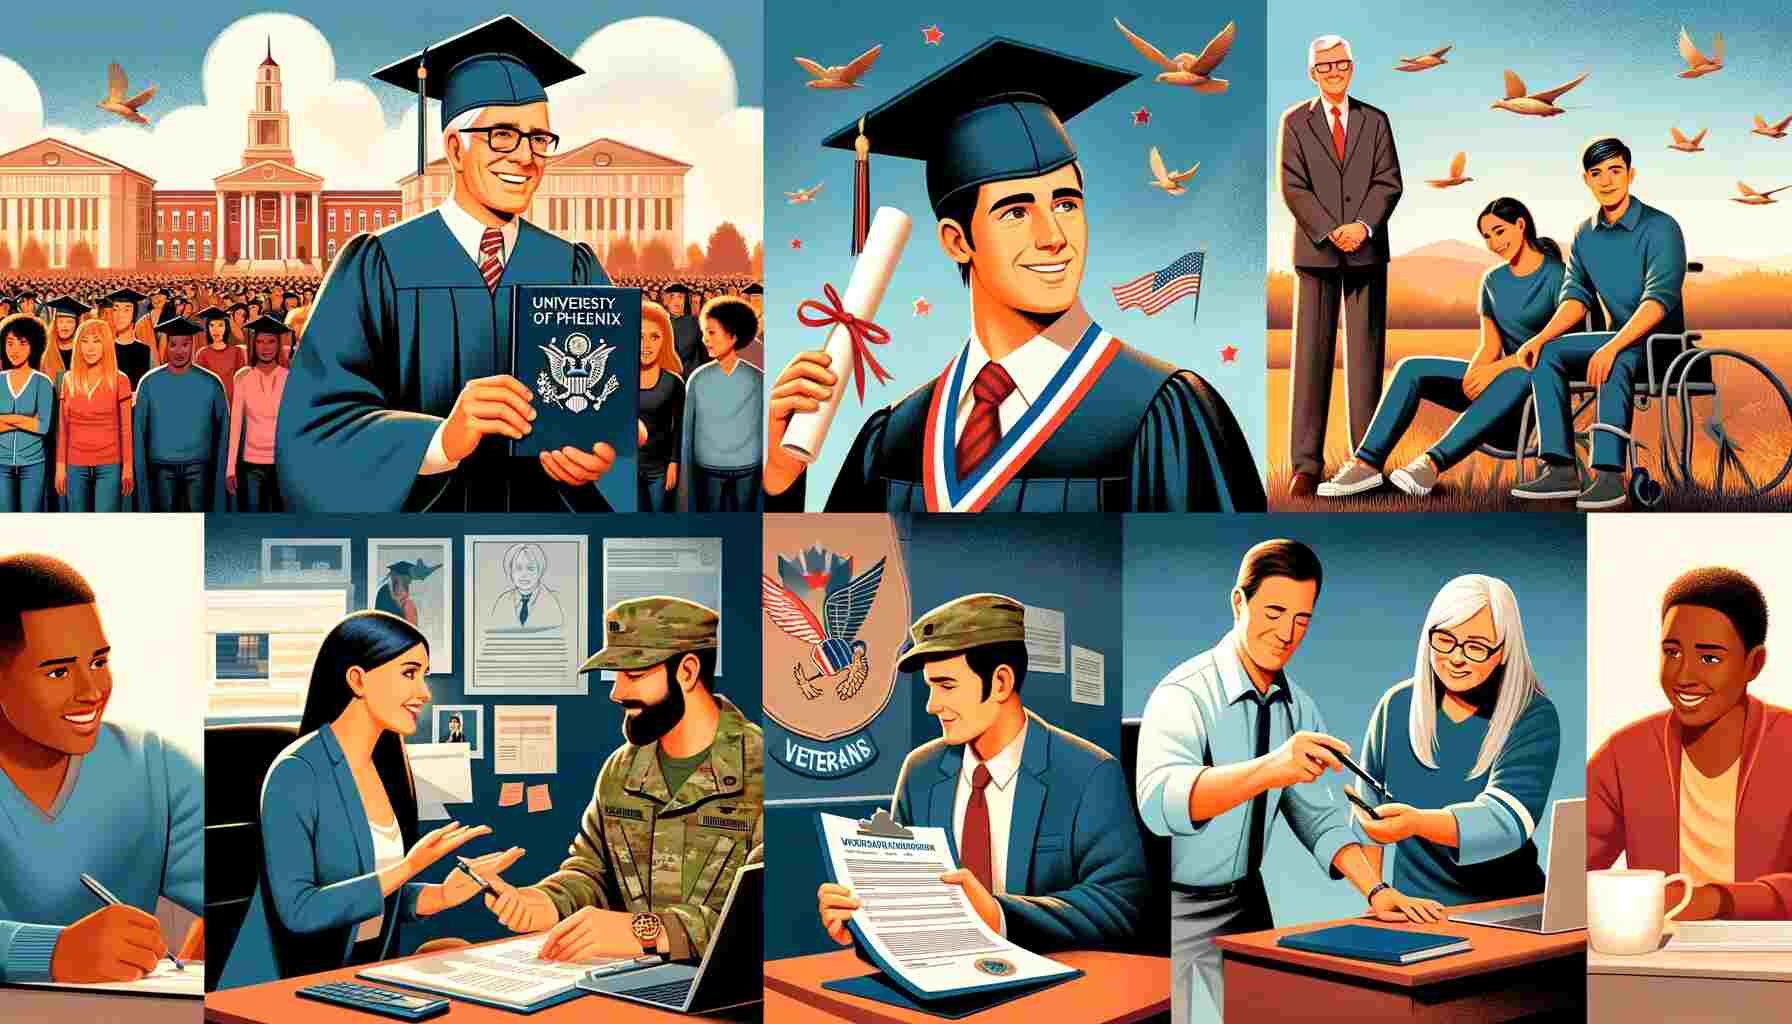 The University of Phoenix is committed to supporting veterans in their pursuit of higher education.